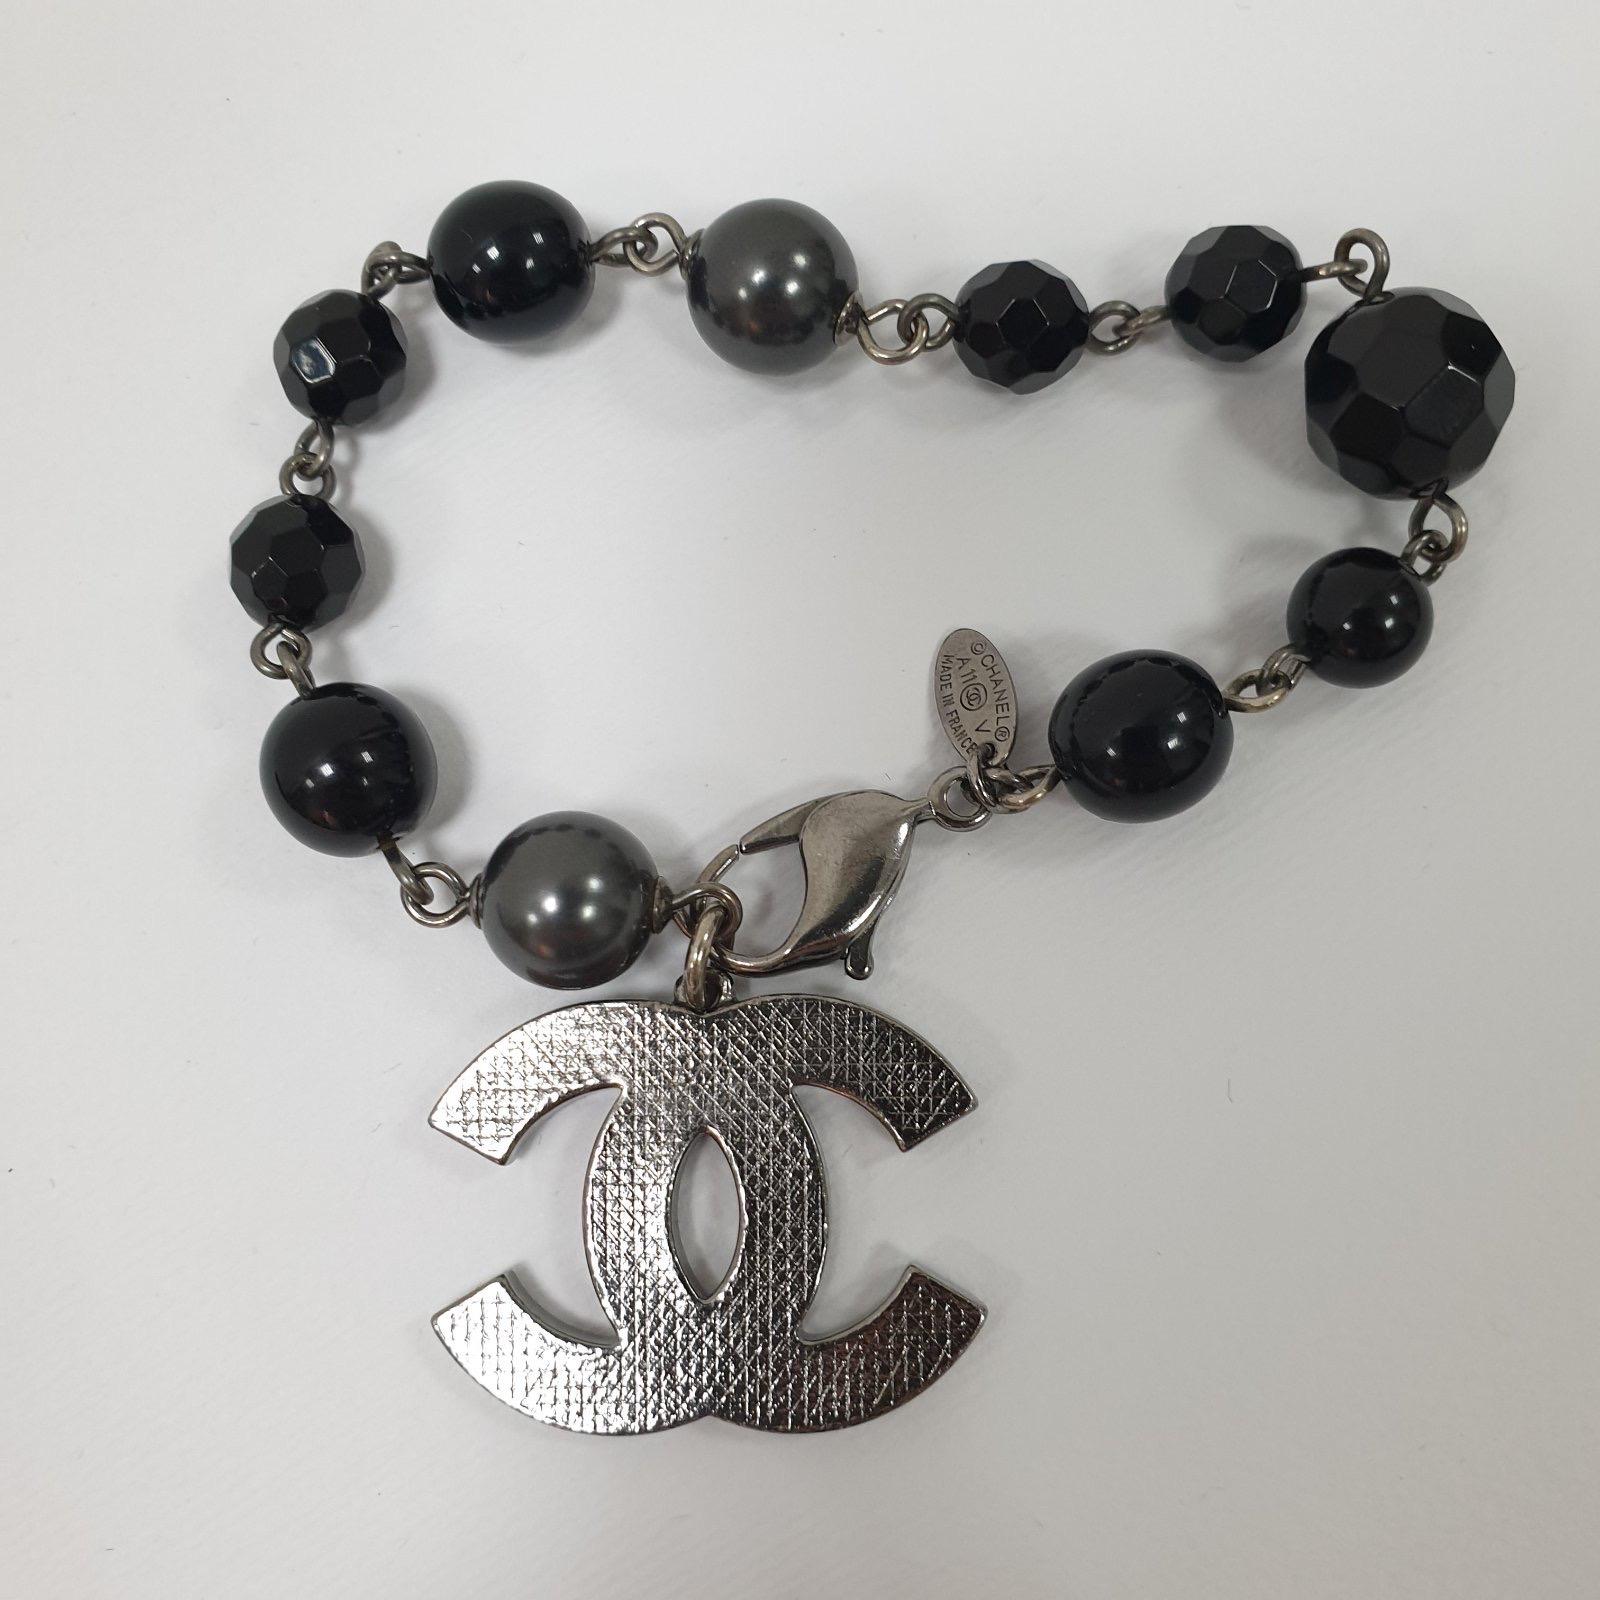 Fall 2011
Crafted from silver-tone metal, this Chanel bracelet is cute and dainty. It features black and grey beads matched with an interlocking CC charm. It comes equipped with a lobster clasp.
No original packaging.